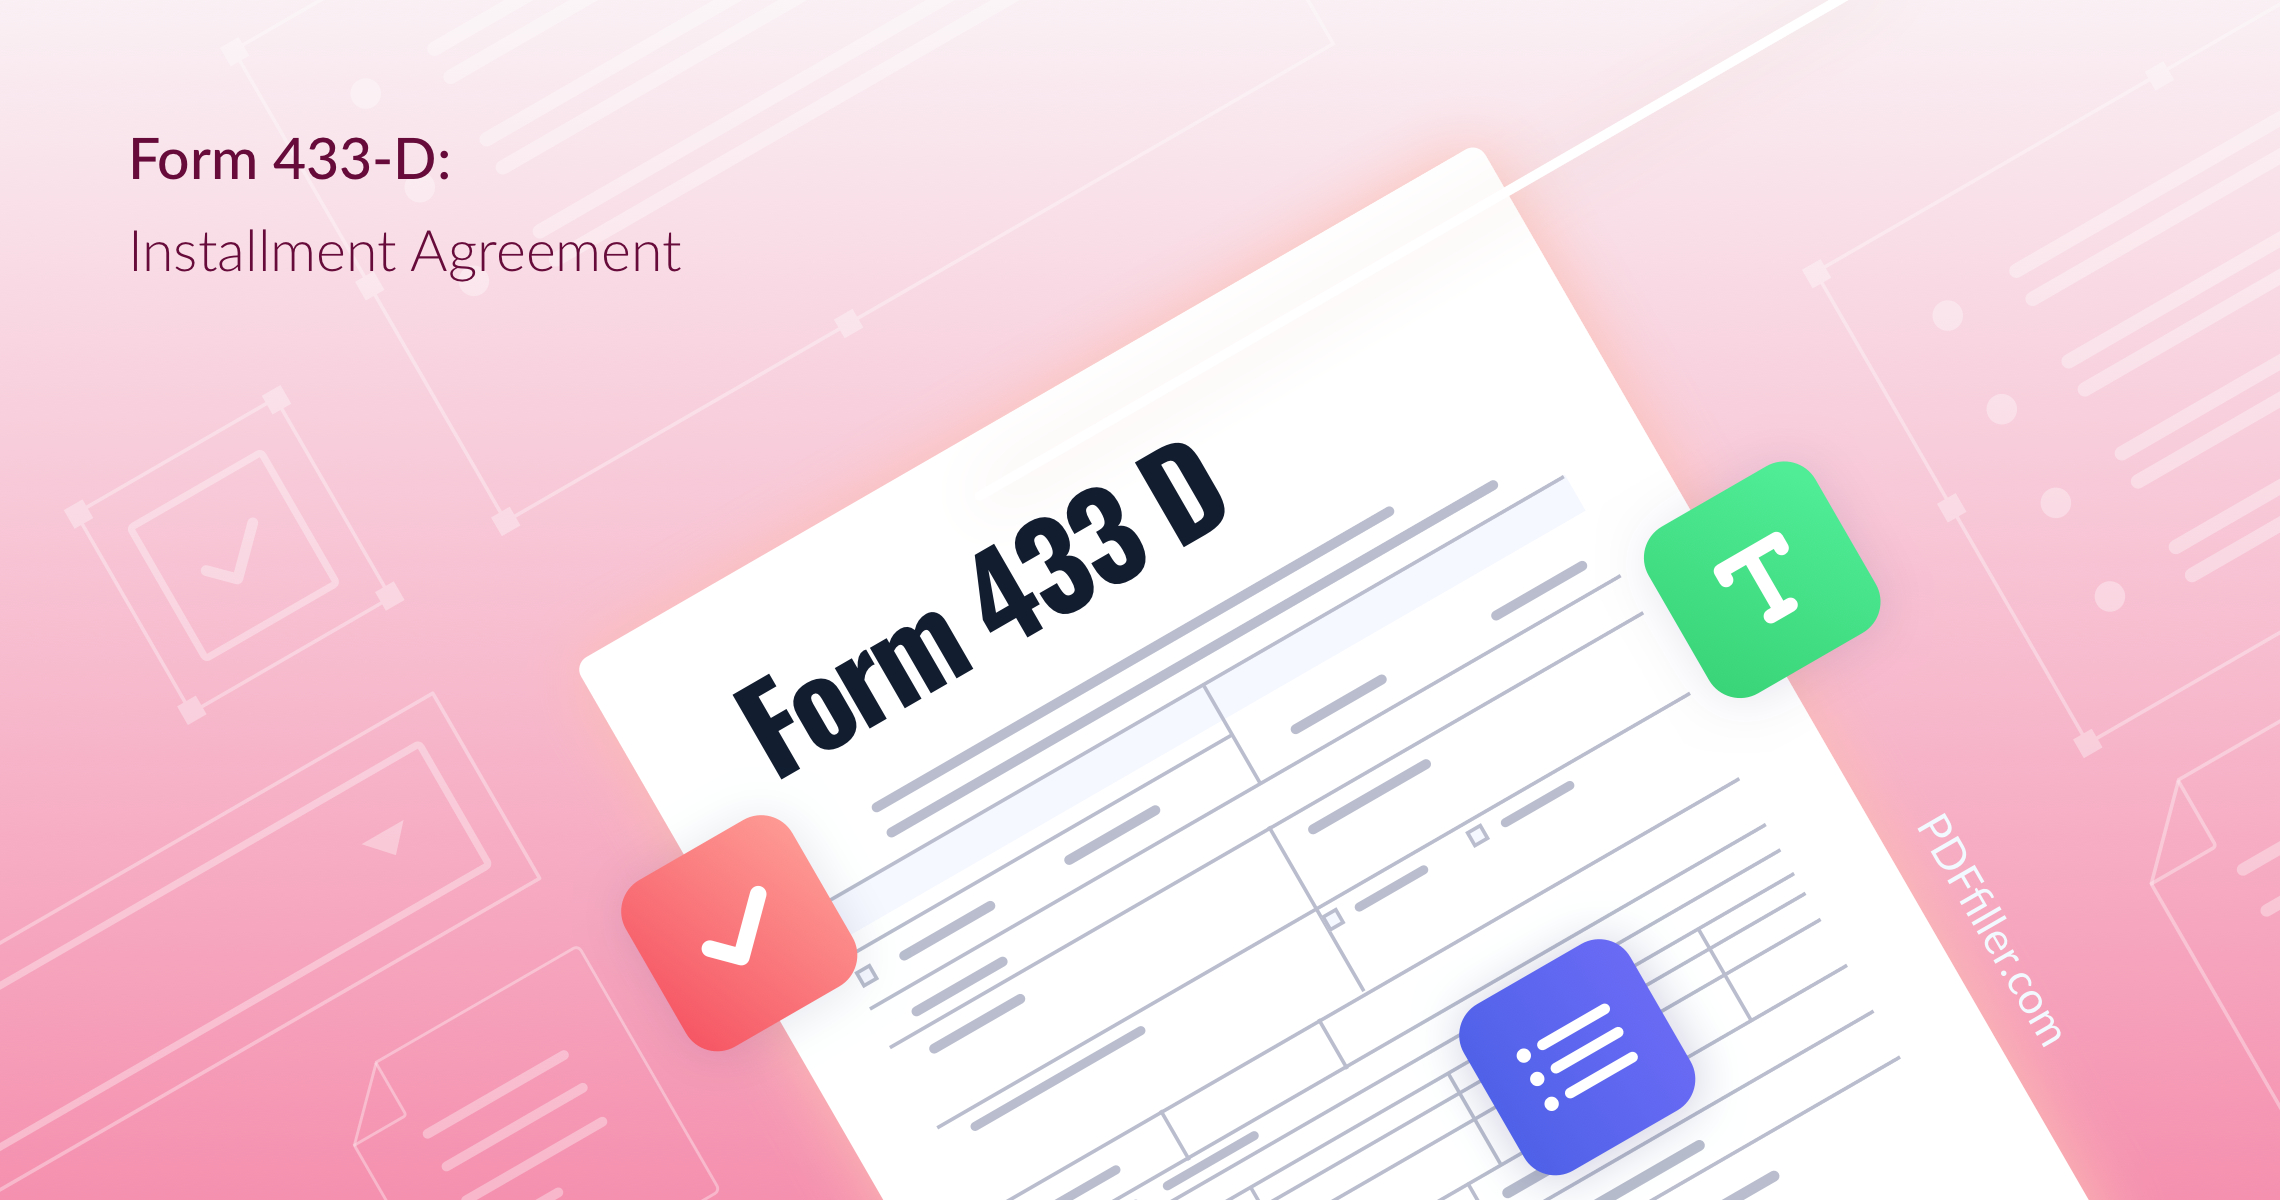 Irs Instalment Agreement Form Form 433 D Working Out The Details Of Your Payment Plan Pdffiller